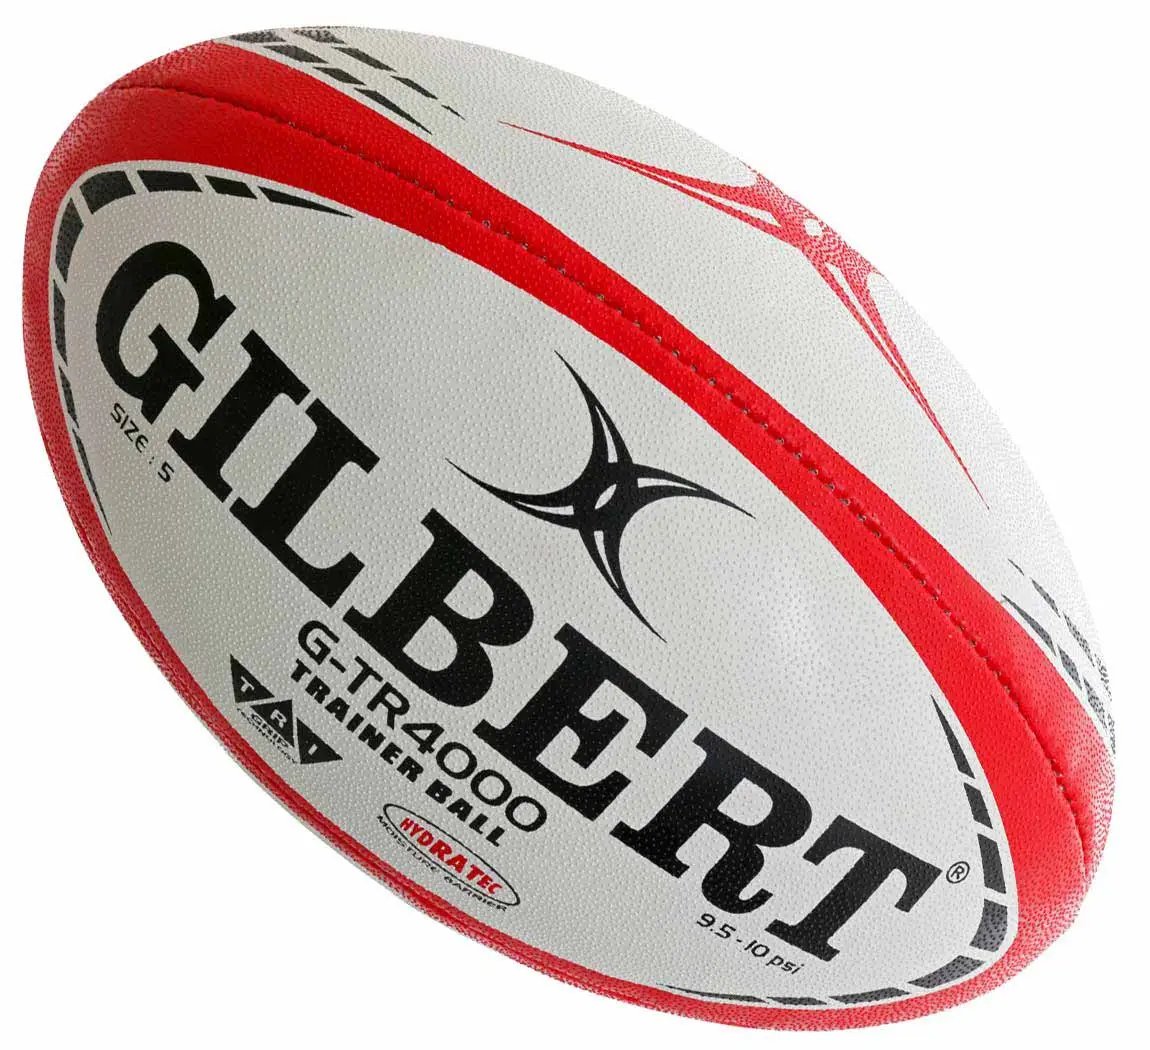 Gilbert G-TR4000 Trainer Rugby Ball 